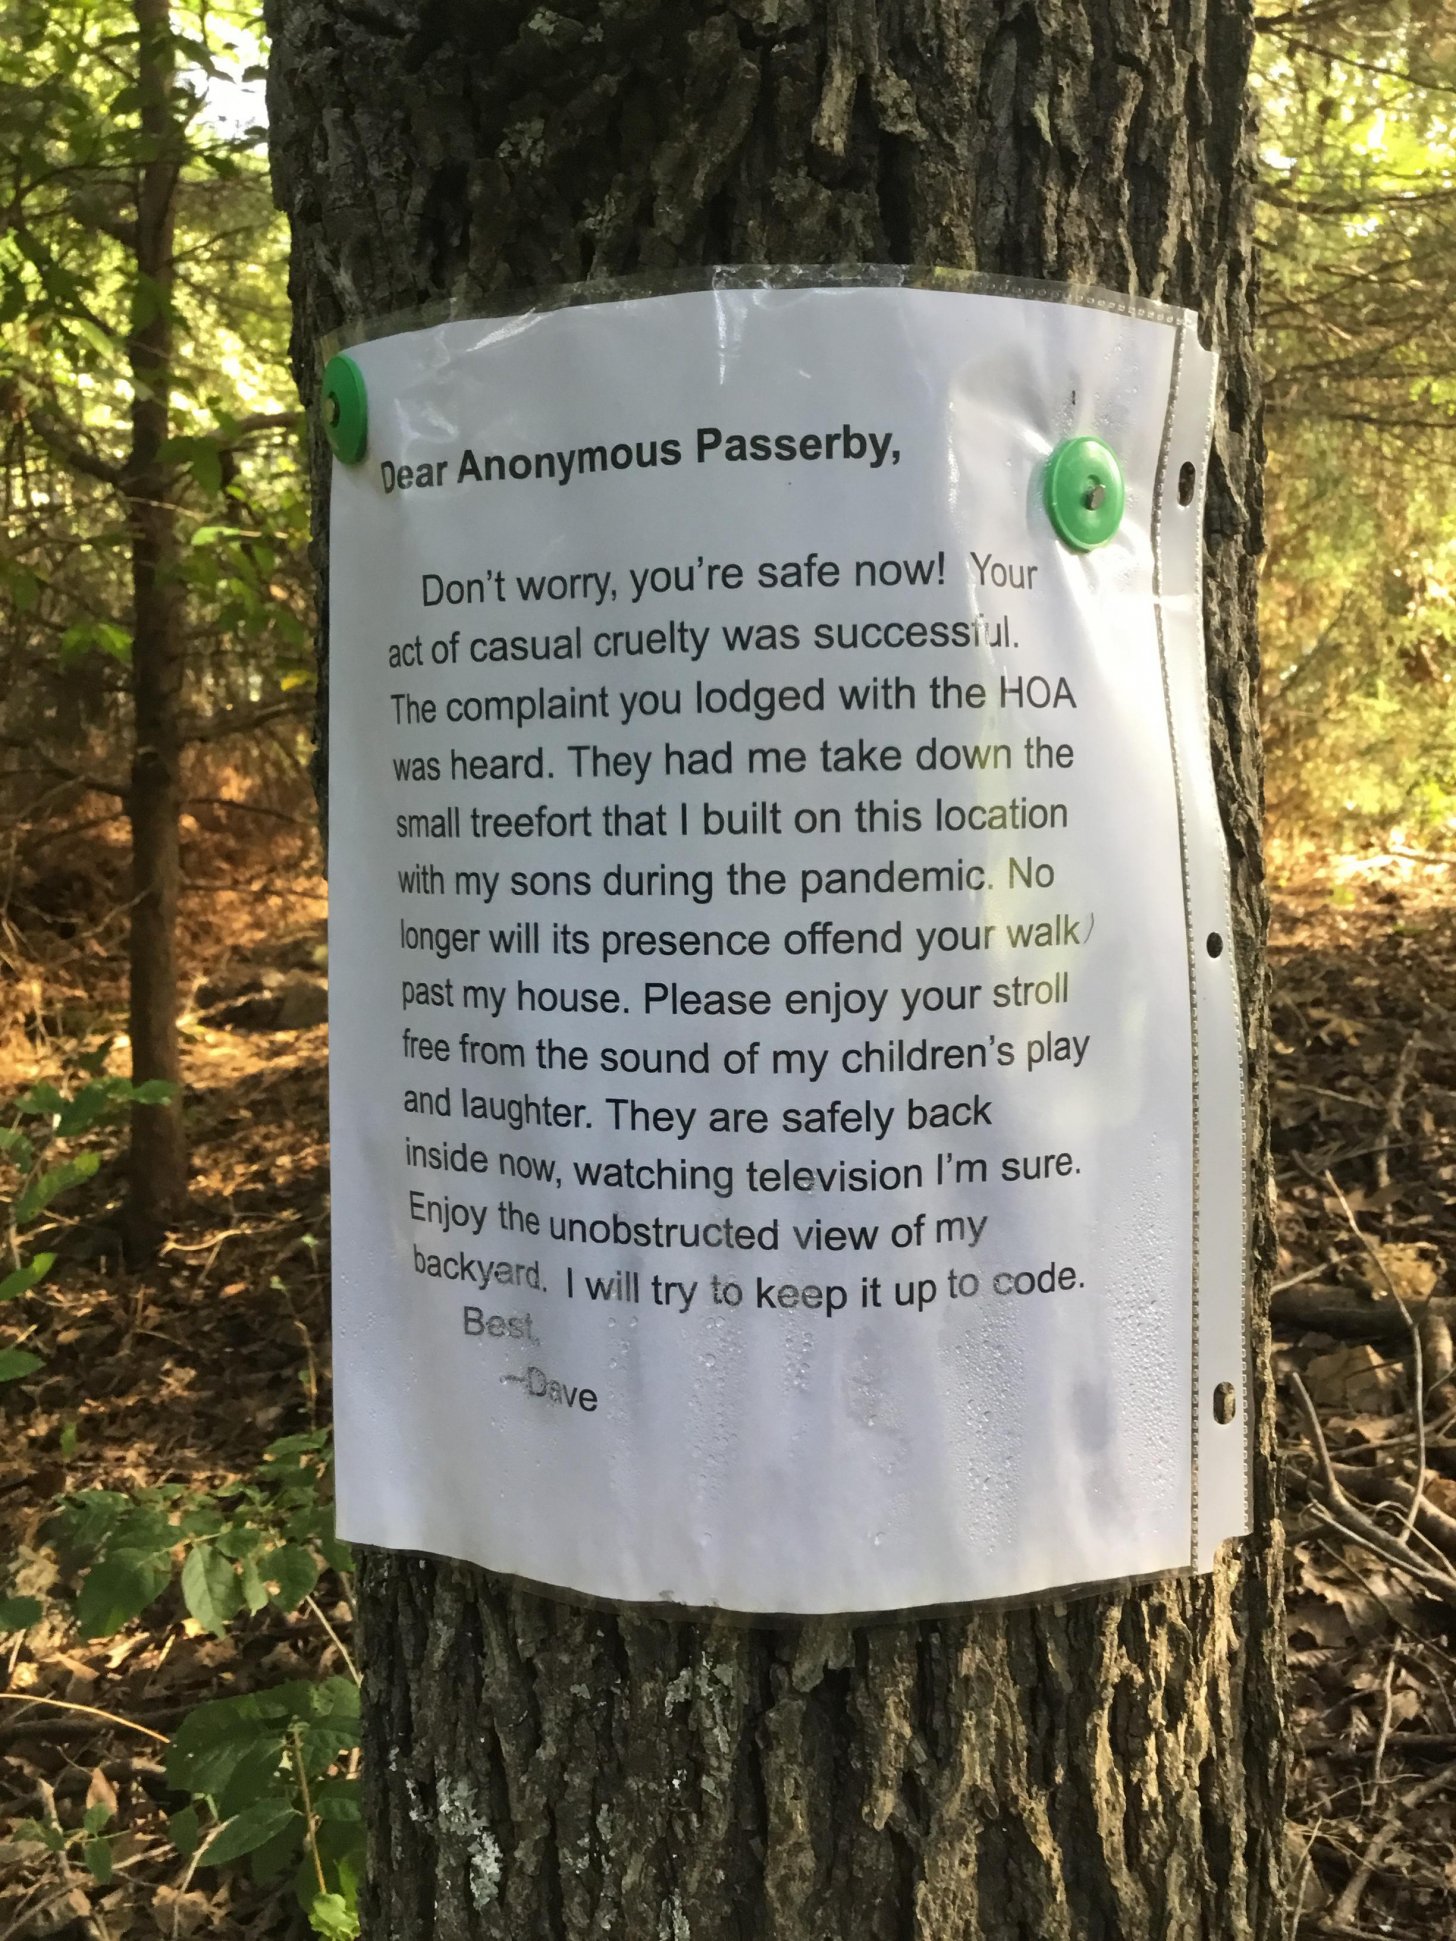 monday morning randomness - dear anonymous passerby - Dear Anonymous Passerby, Don't worry, you're safe now! Your act of casual cruelty was successi The complaint you lodged with the Hoa was heard. They had me take down the small treefort that I built on 